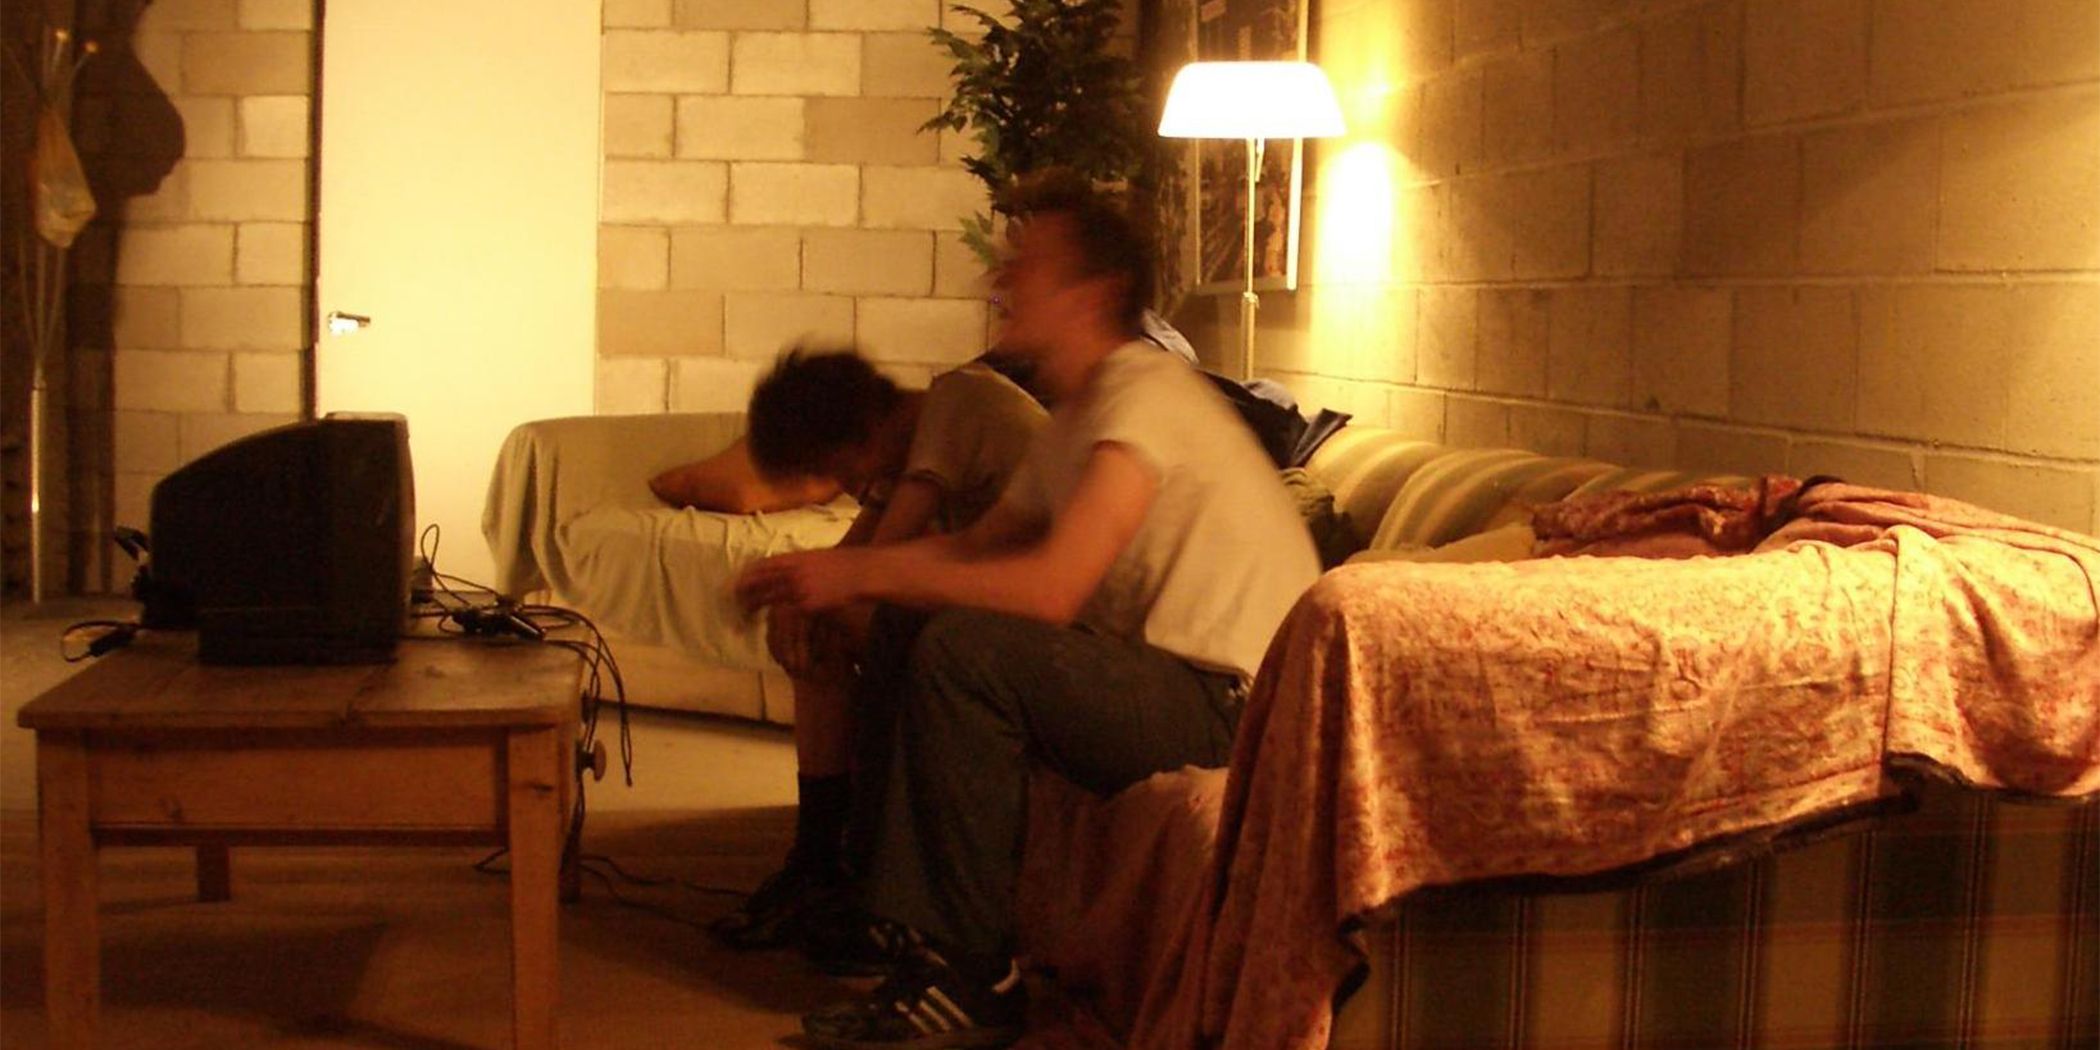 A photo of two guys blurred in motion sitting on a couch in front of a TV